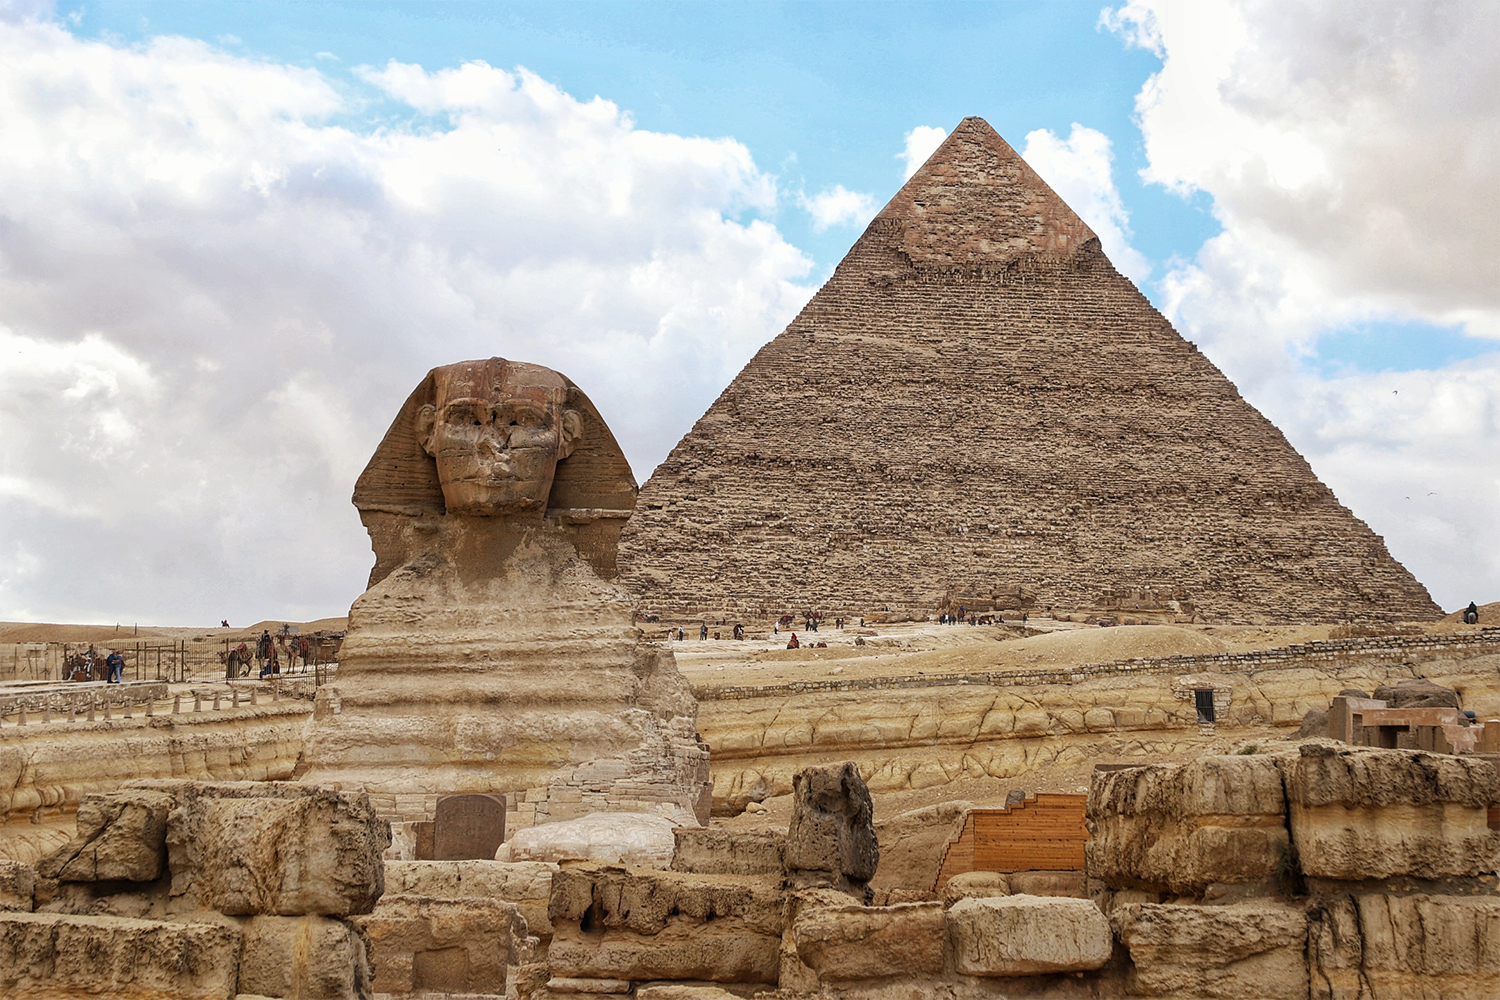 The Great Sphinx of Giza in the foreground with the Great Pyramid of Giza in the background